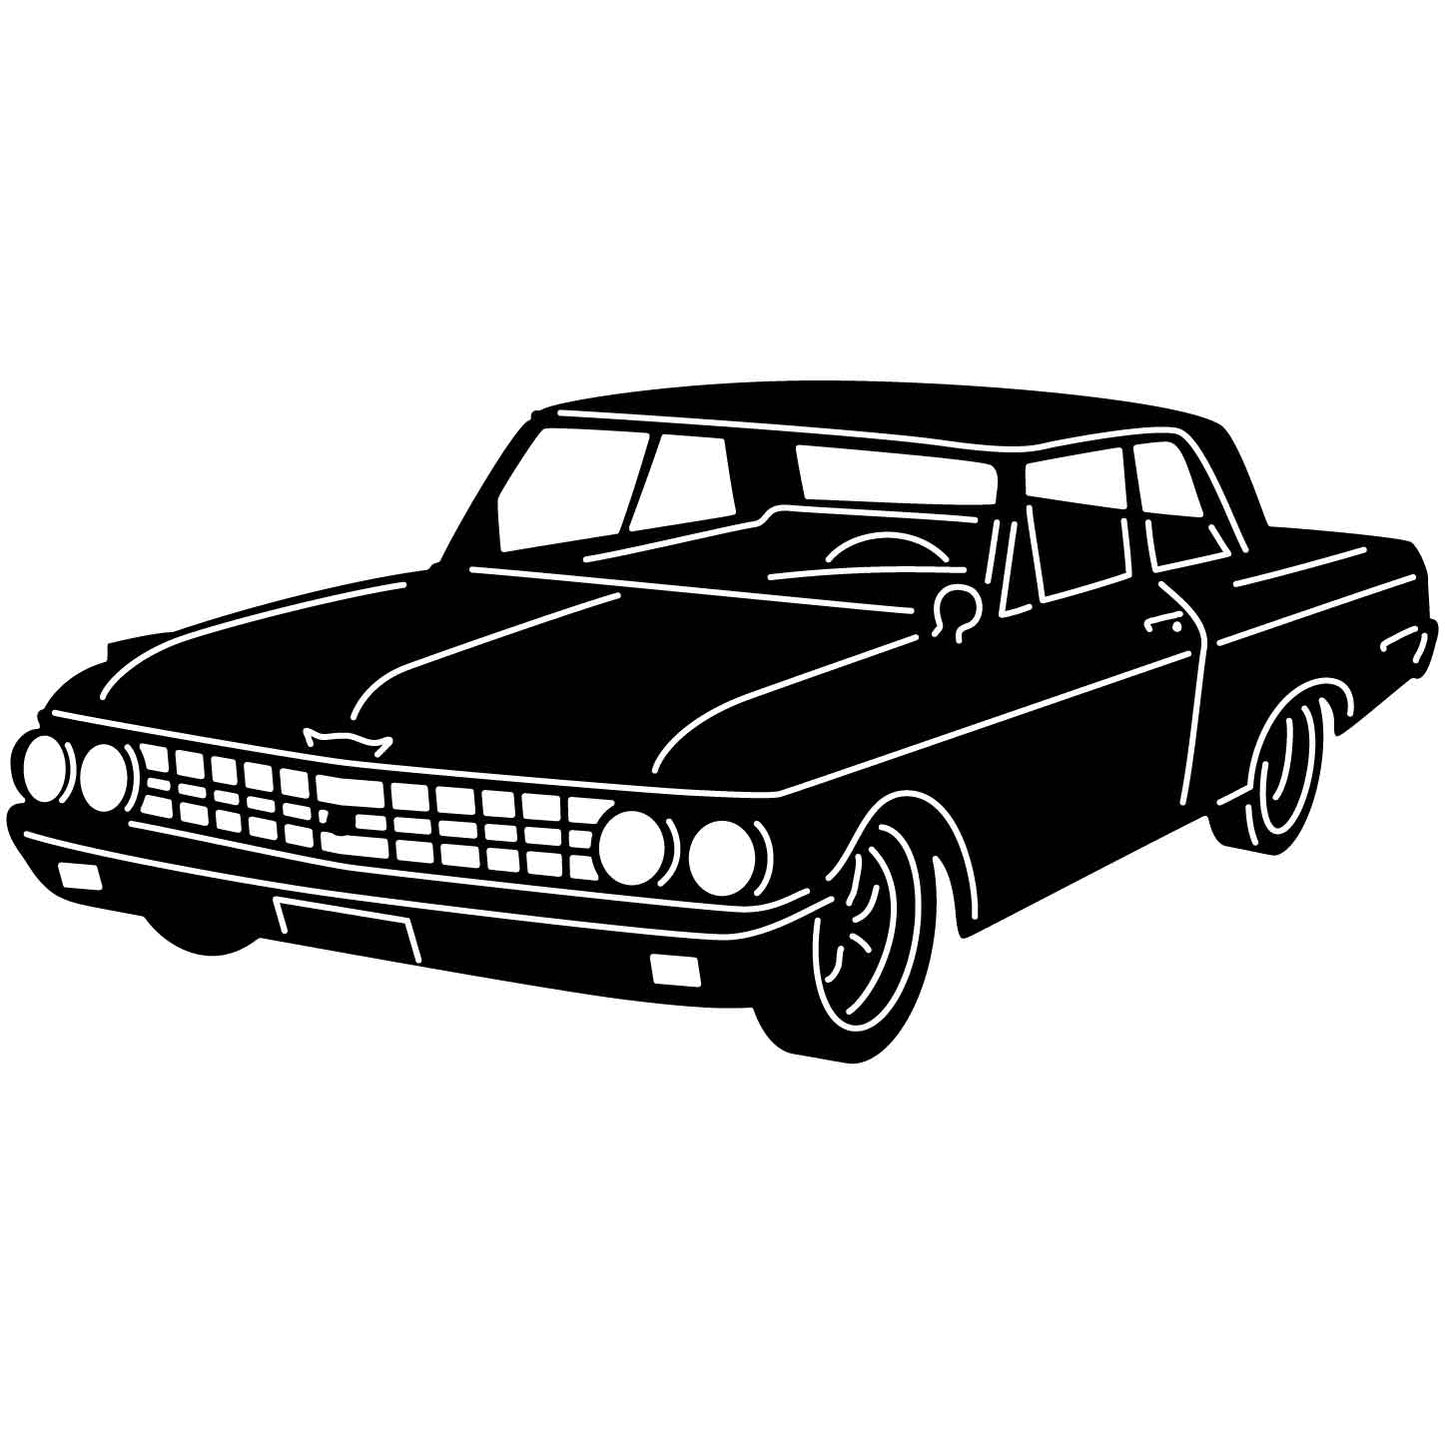 GTA Fairlane Old Muscle Car-DXF file cut ready for CNC machines-DXFforCNC.com